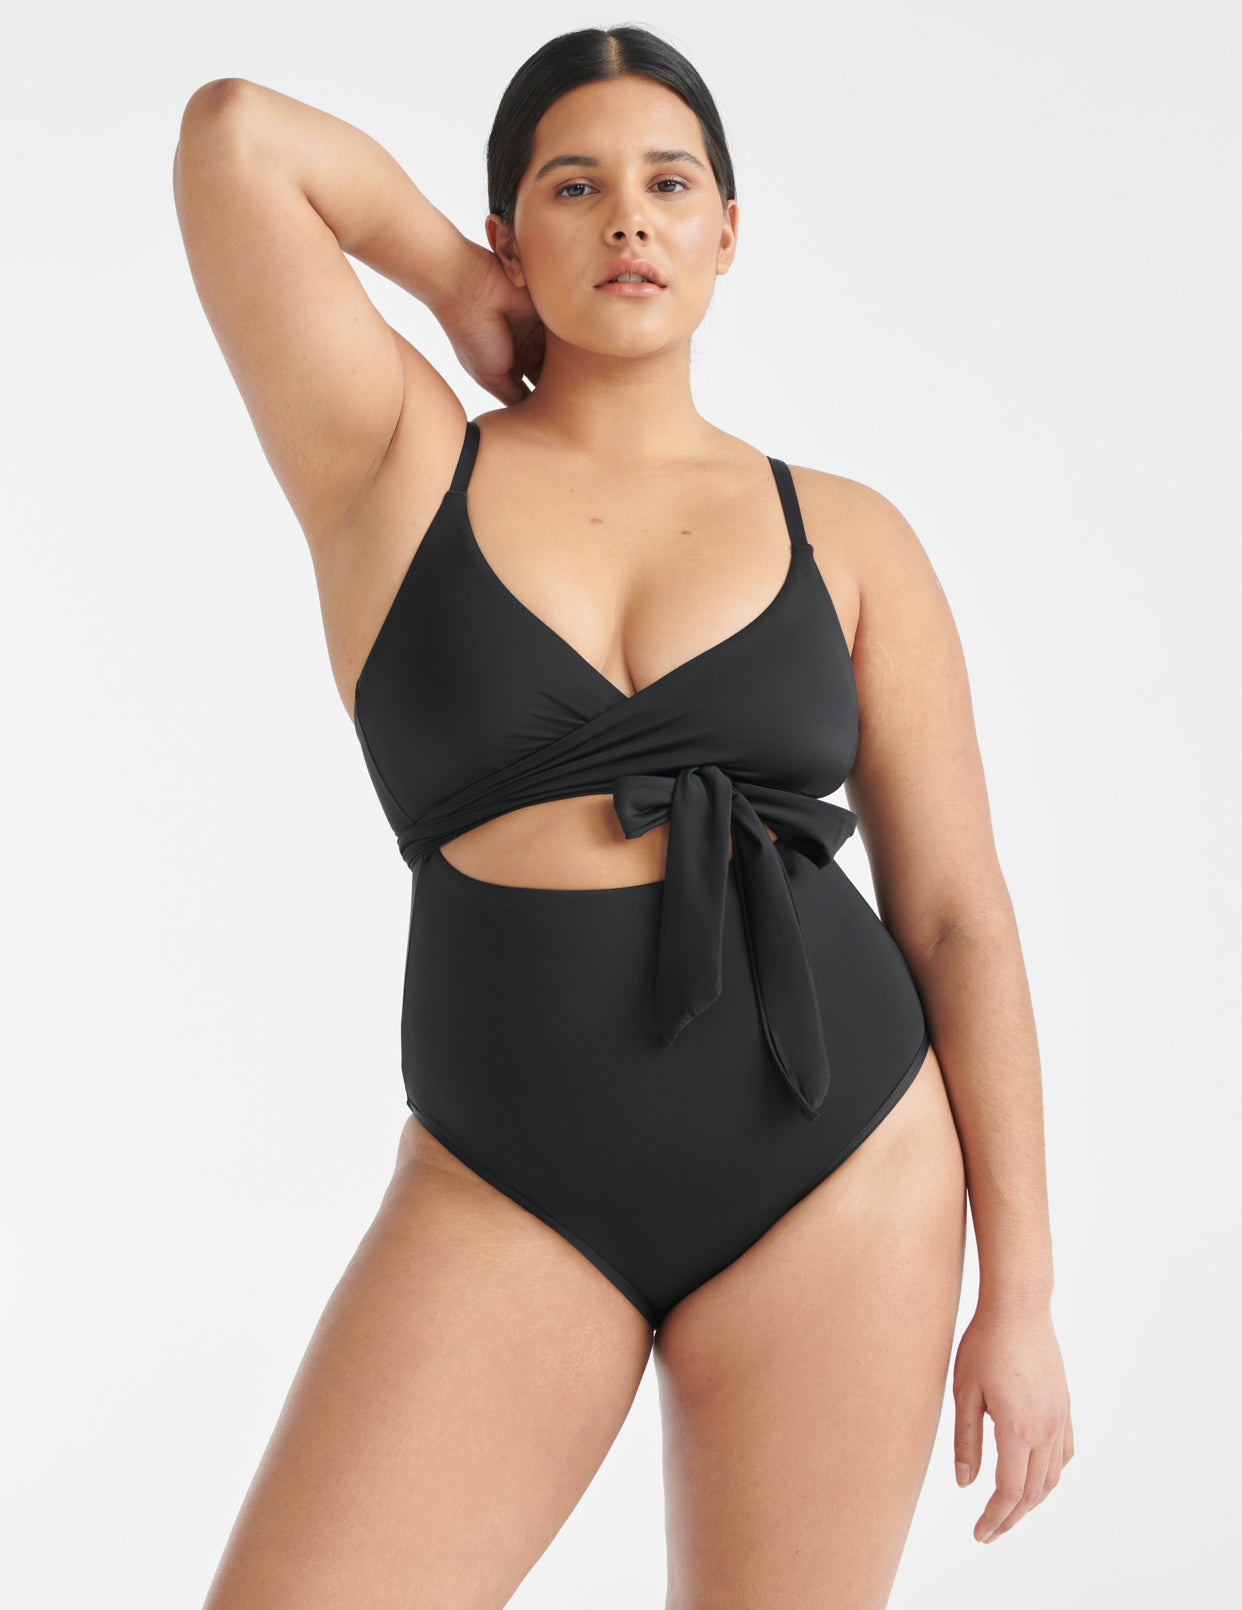 Kt by Knix: its the perfect time for a new two-piece